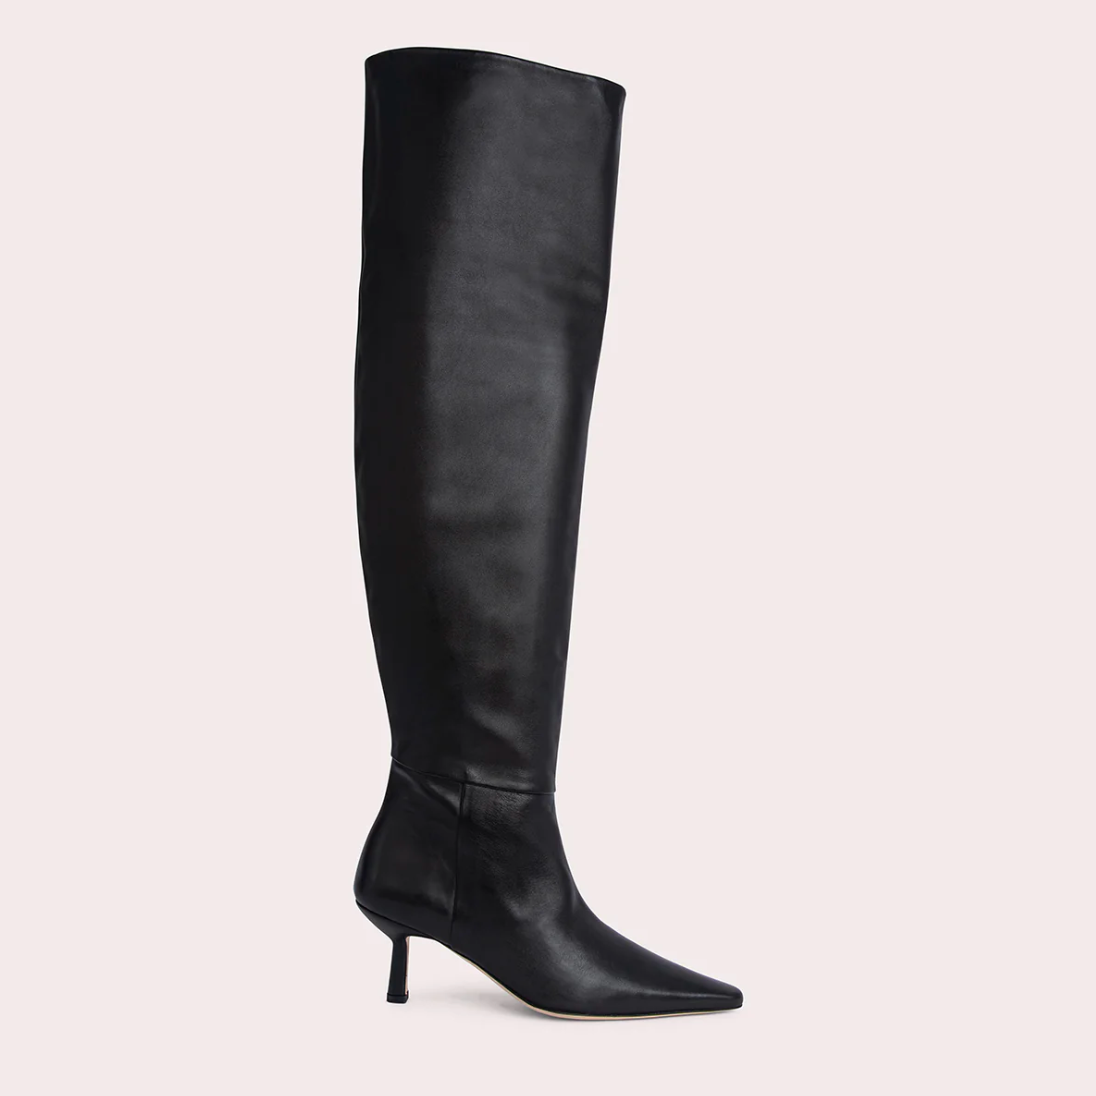 Close detail side photo of the Meghan Boot - Black.